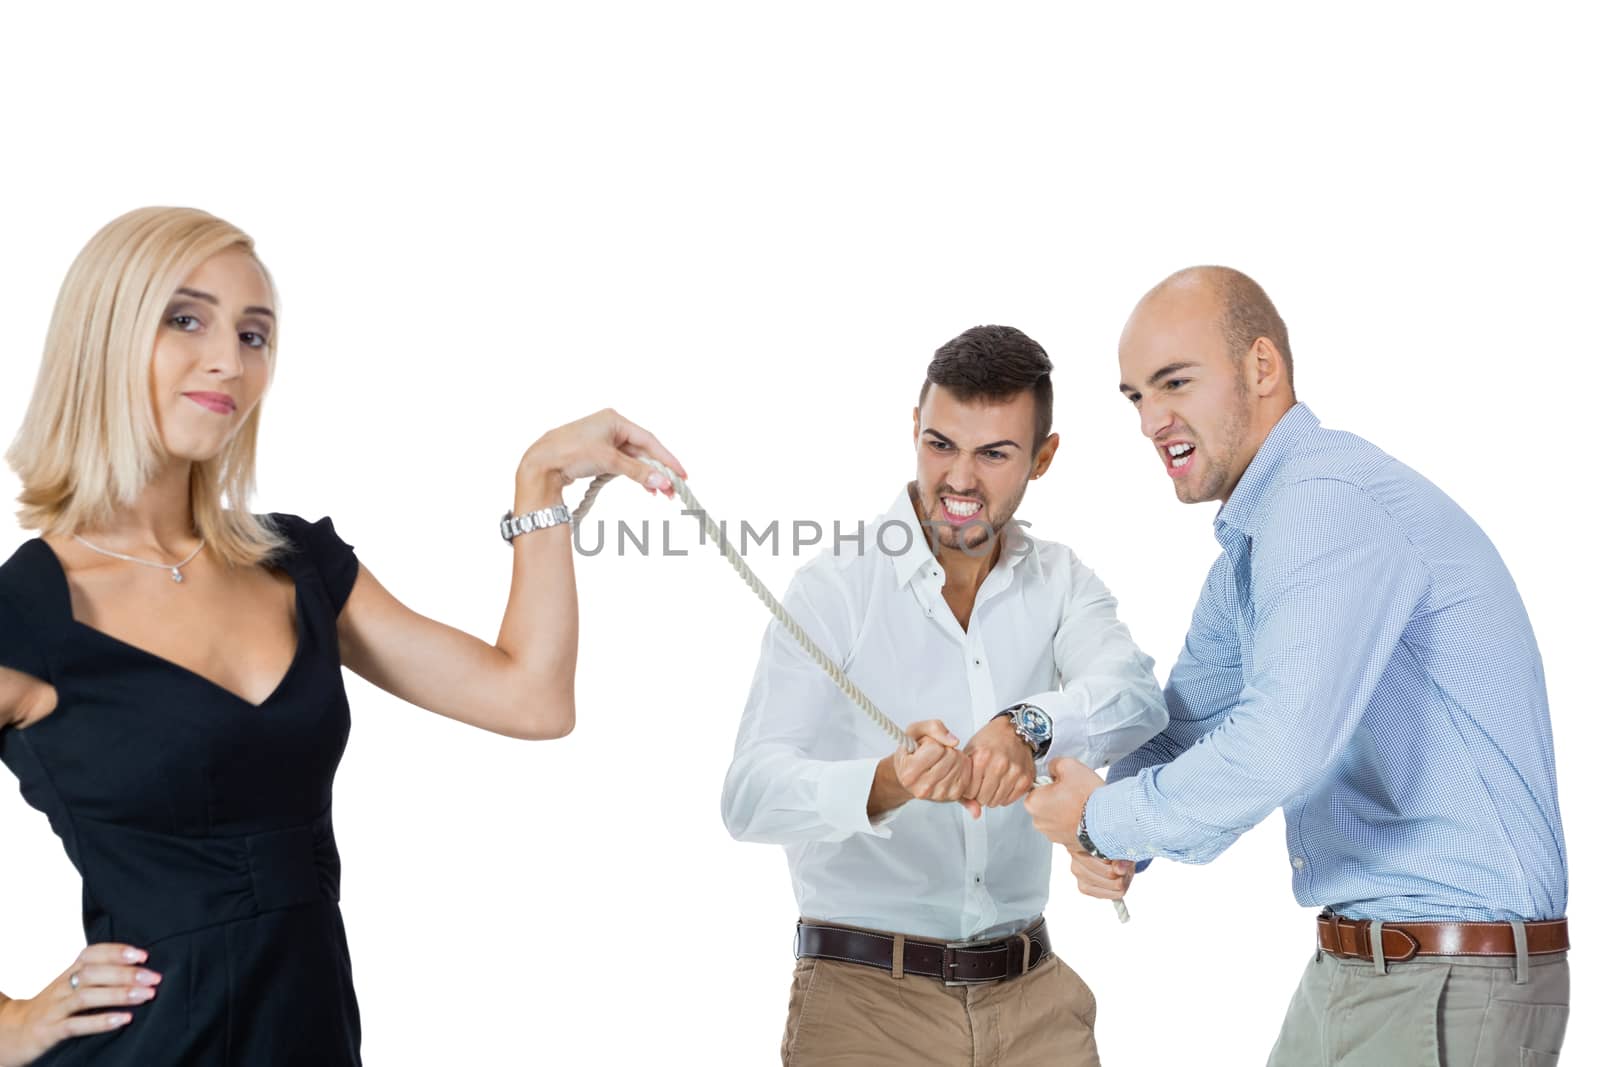 Beautiful strong fit woman demonstrating her dominance in a tug of war with two men pulling as hard as they can on the end of a rope she is holding while she remains nonchalant and glamorous, on white